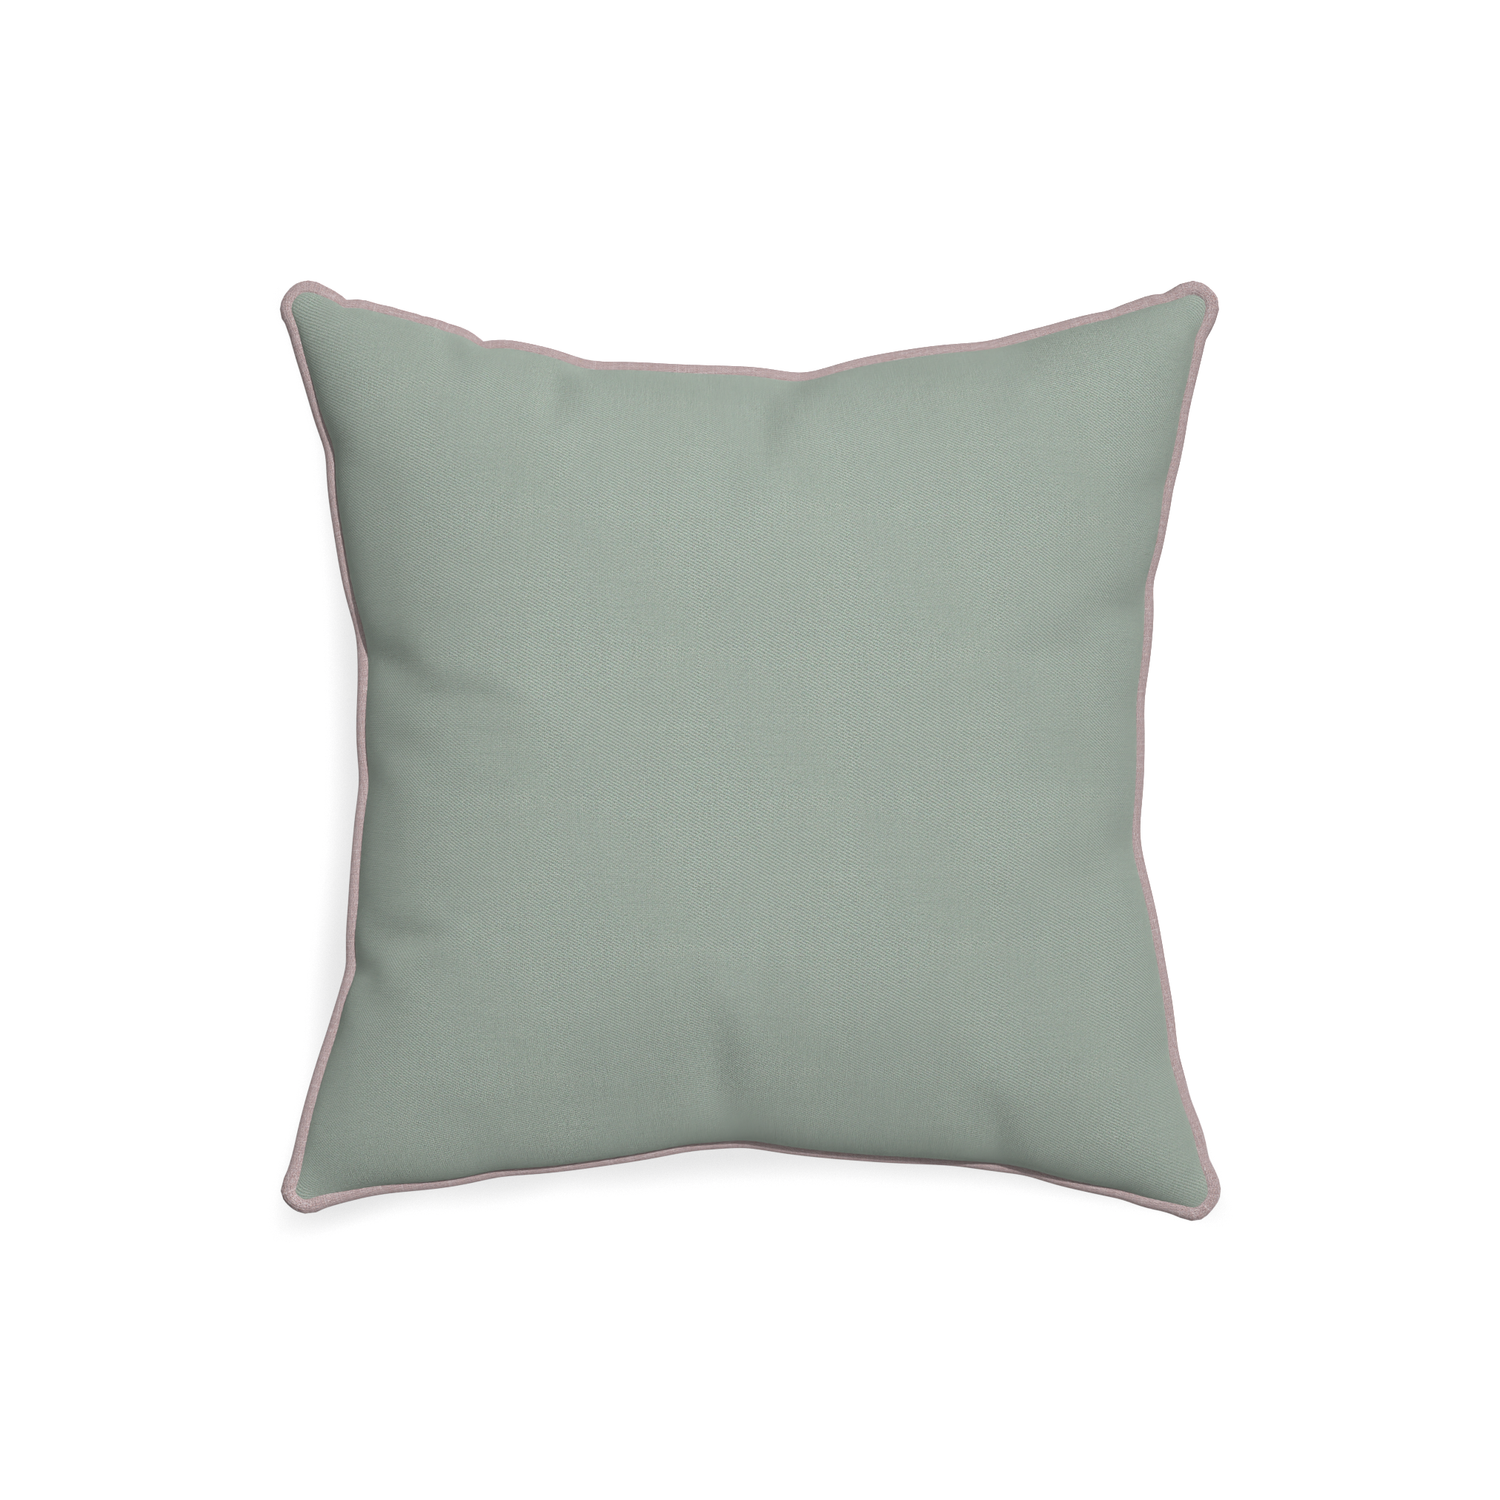 20-square sage custom sage green cottonpillow with orchid piping on white background